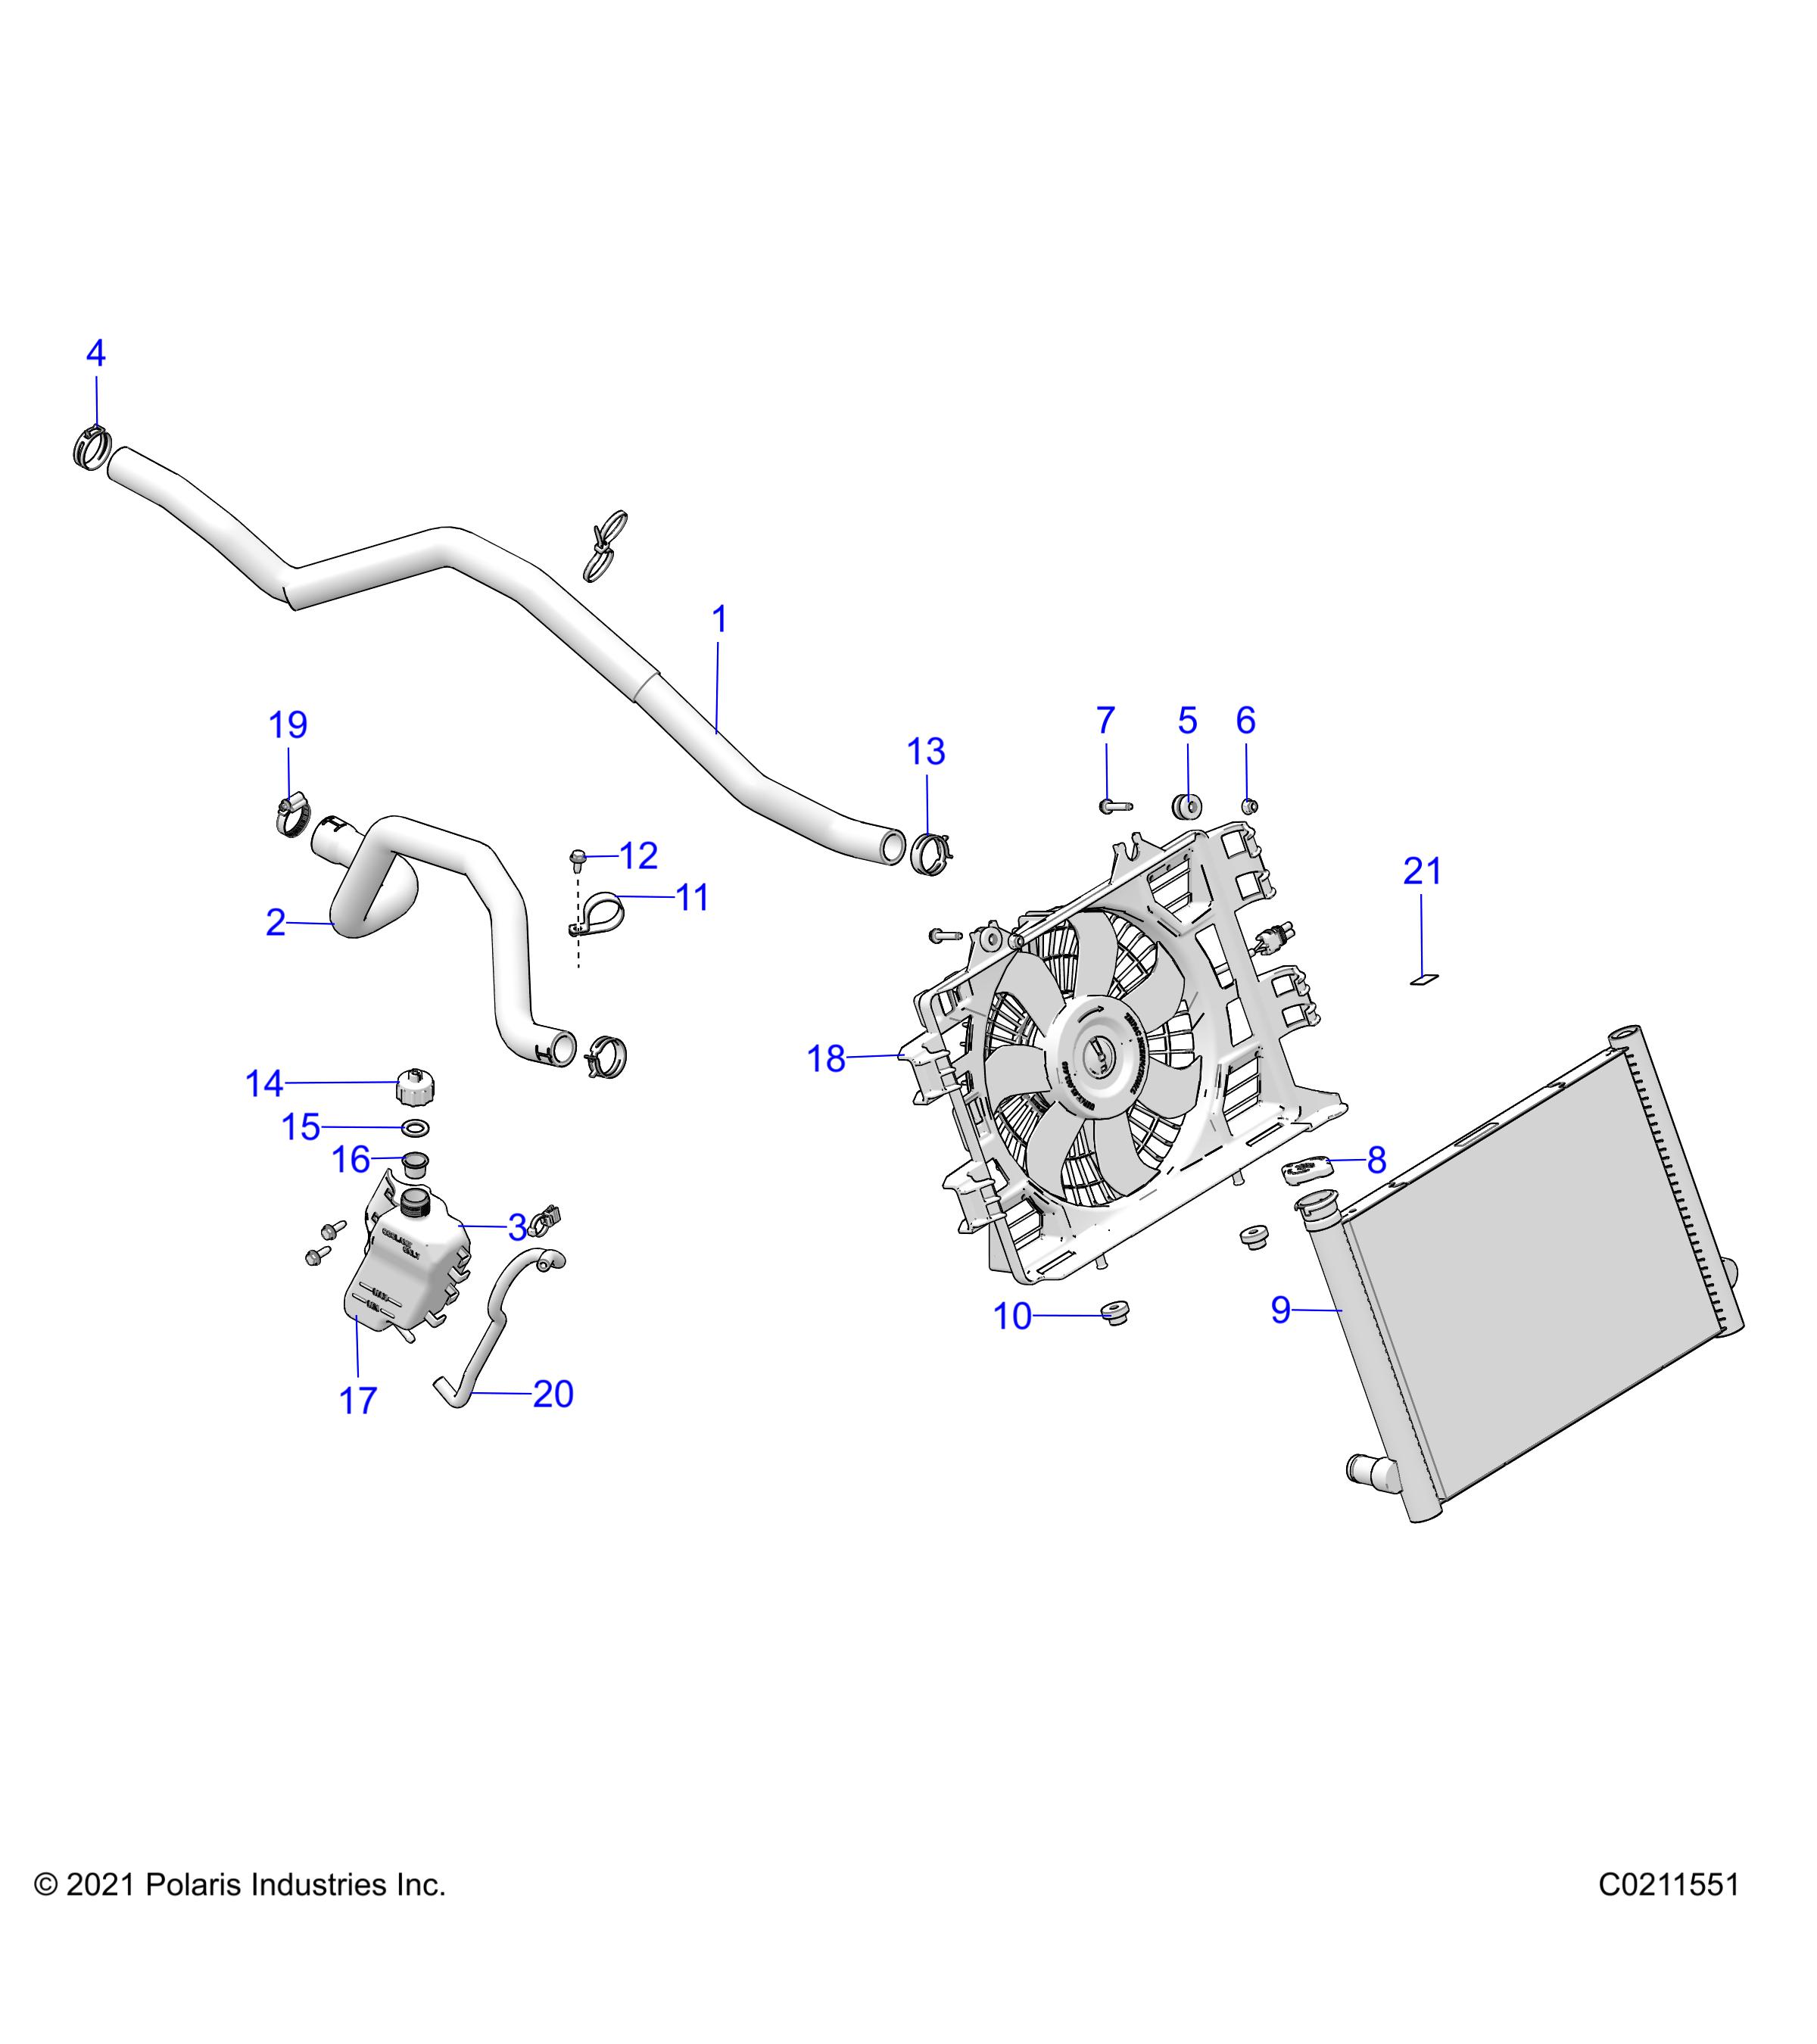 Part Number : 1240406 BOTTLE ASSEMBLY  COOLANT RECOV